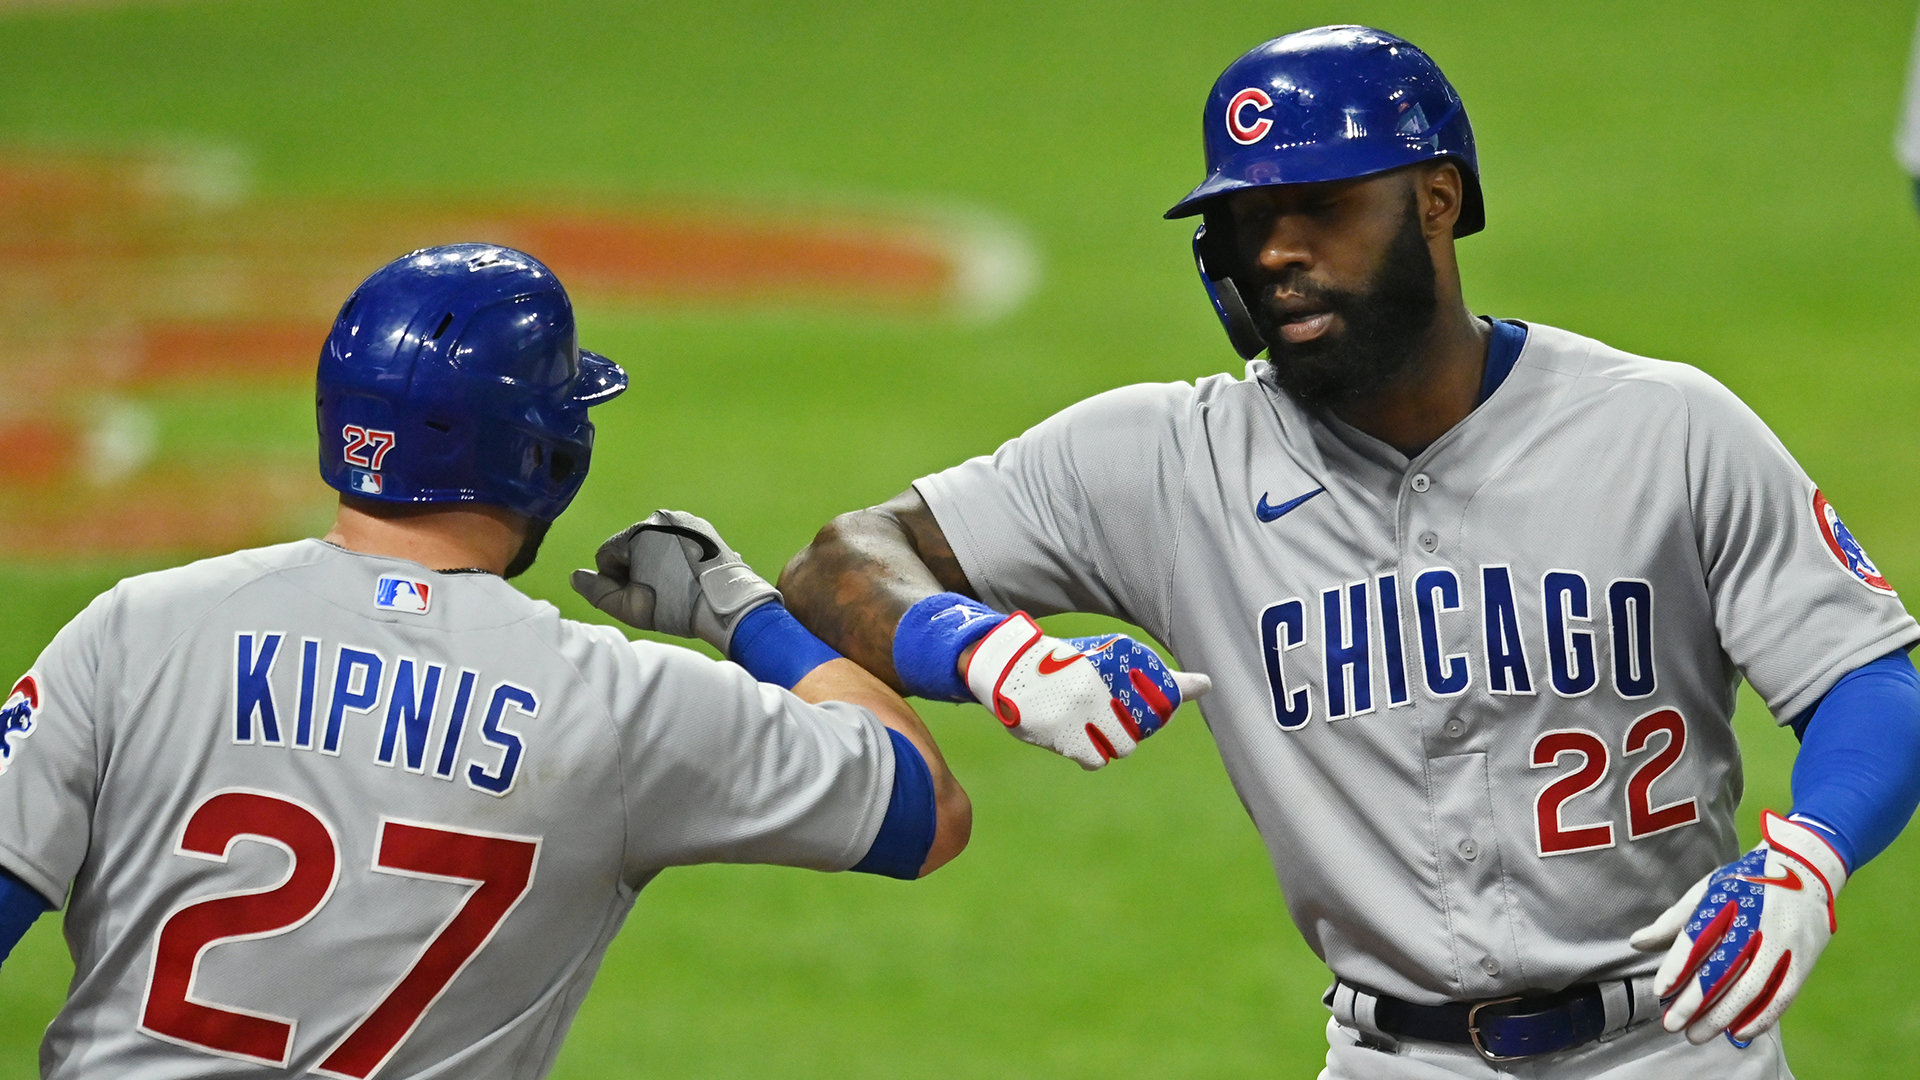 Cubs' Jason Heyward Returns After Negative COVID-19, Cardio, Allergy Tests  – NBC Chicago